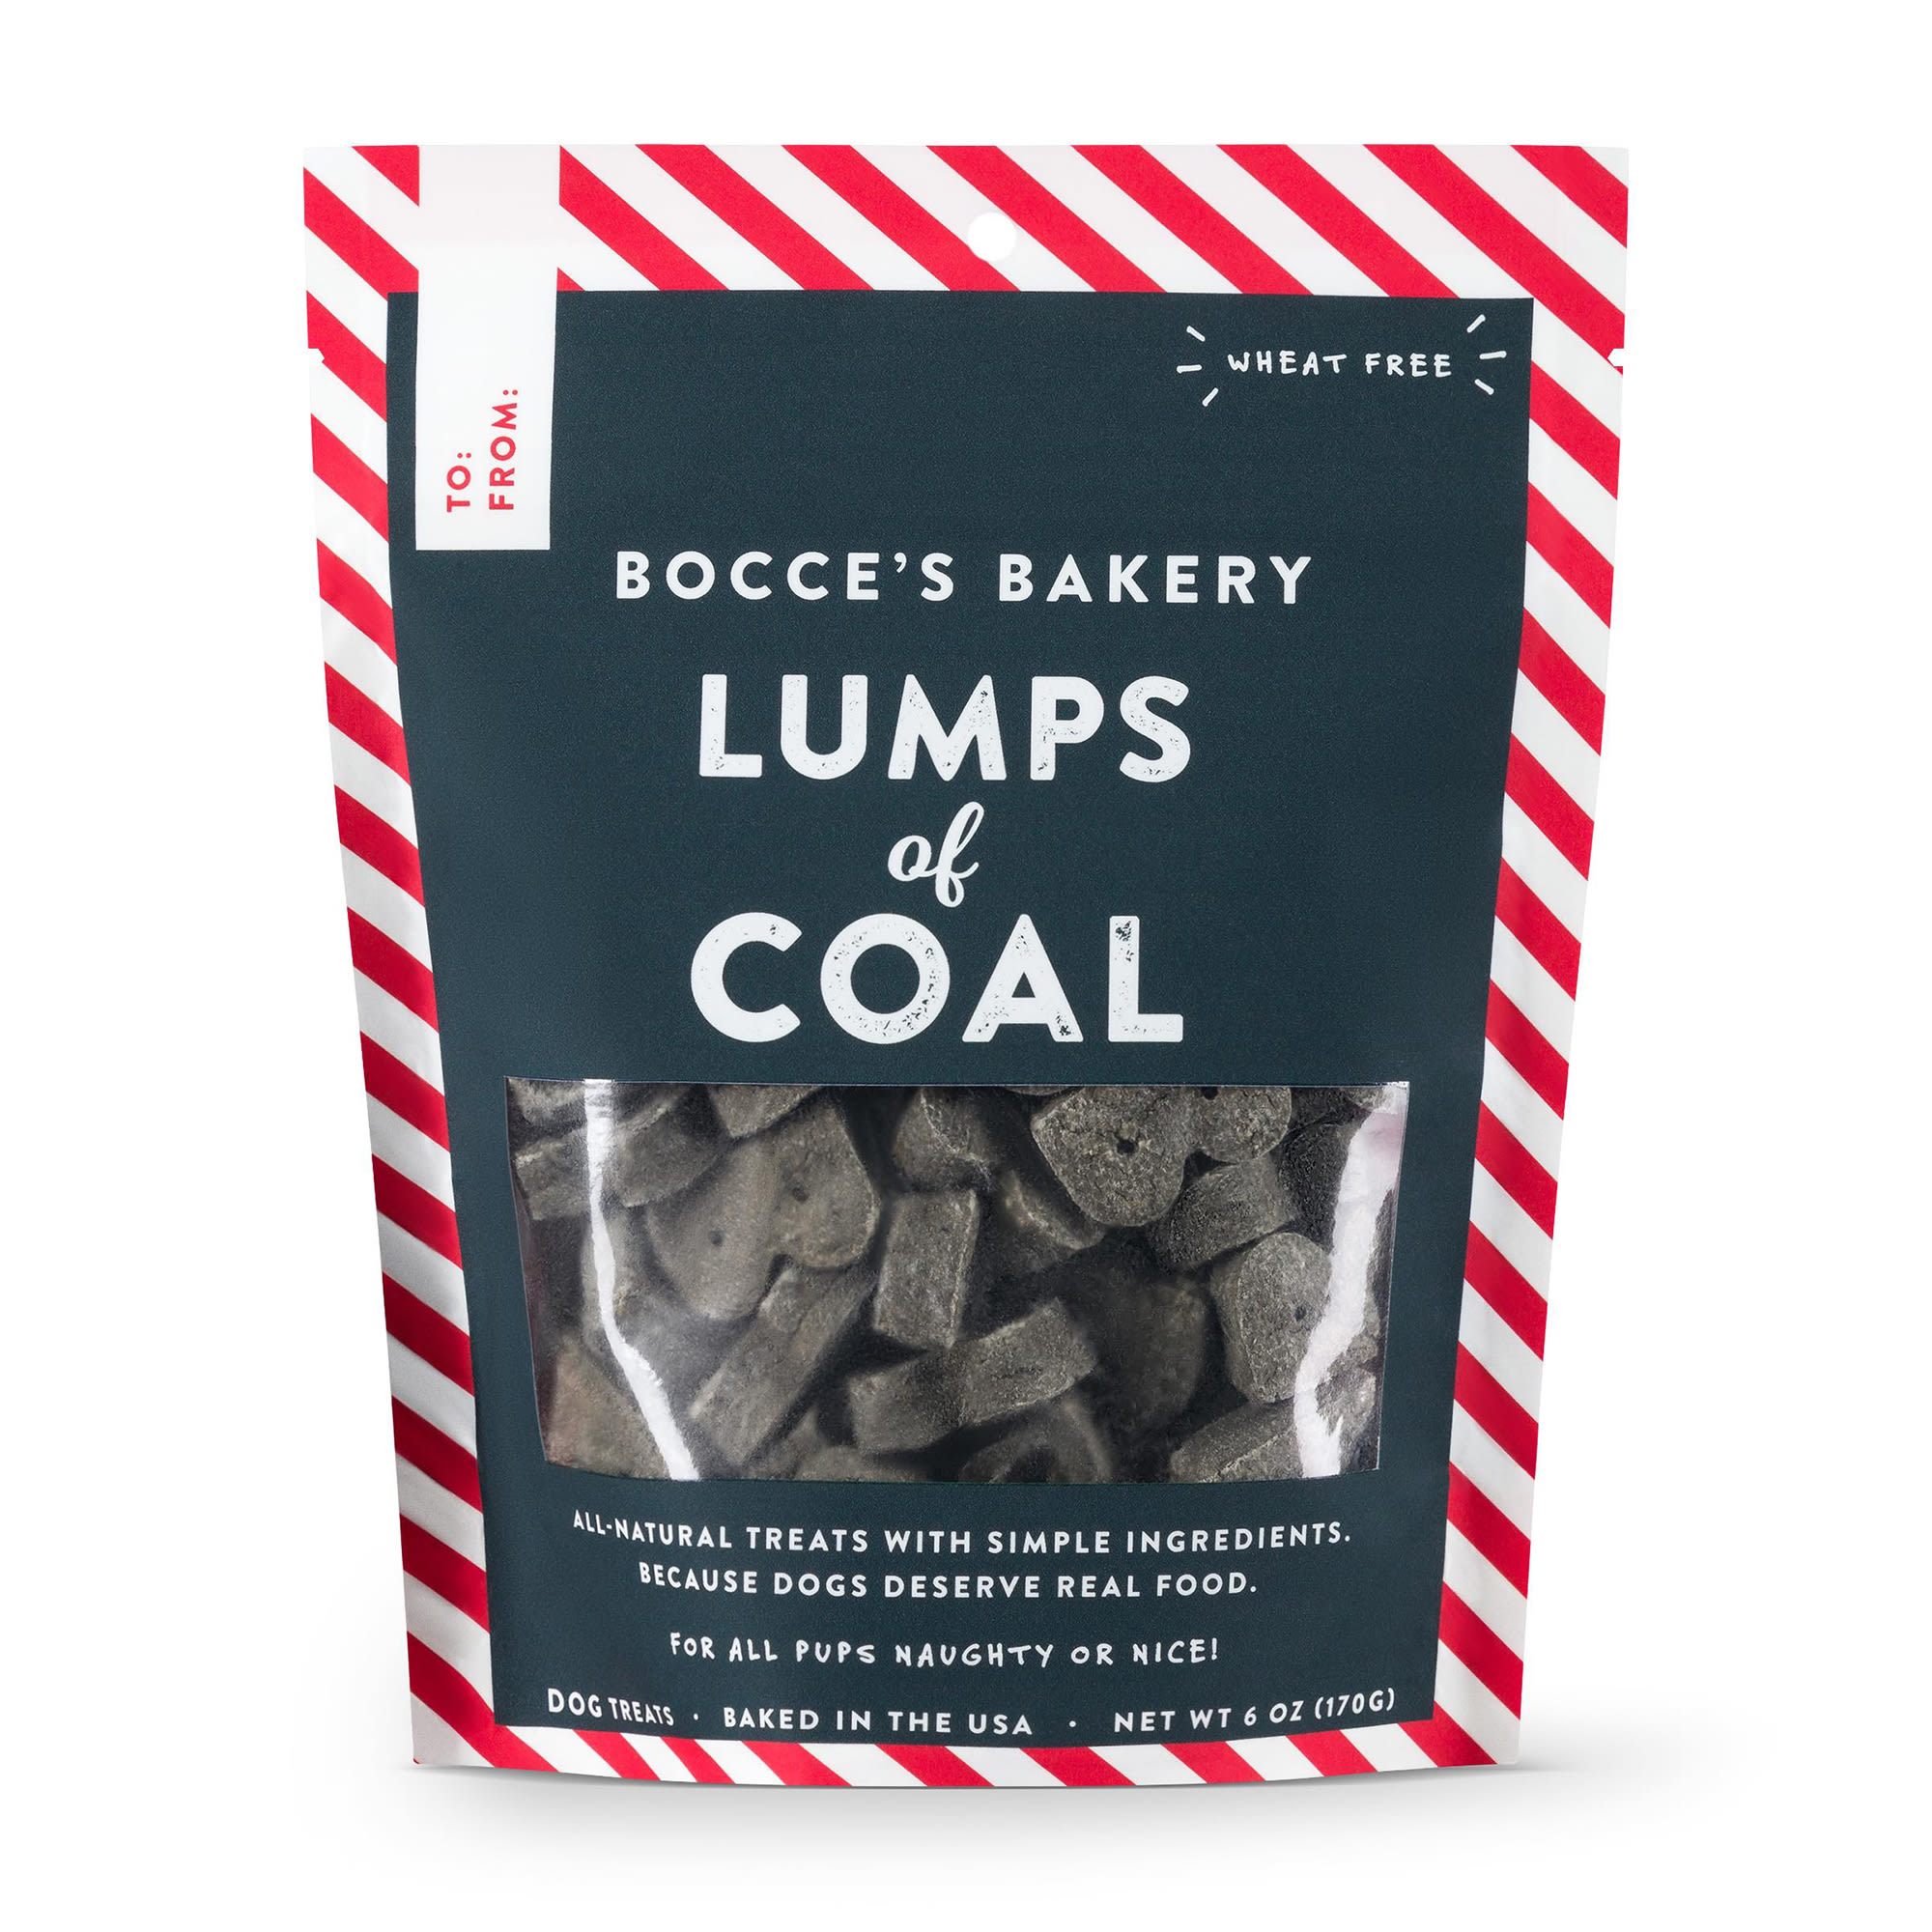  Bocce's Bakery All-Natural Lumps of Coal Soft & Chewy Dog Treats, 6 oz.